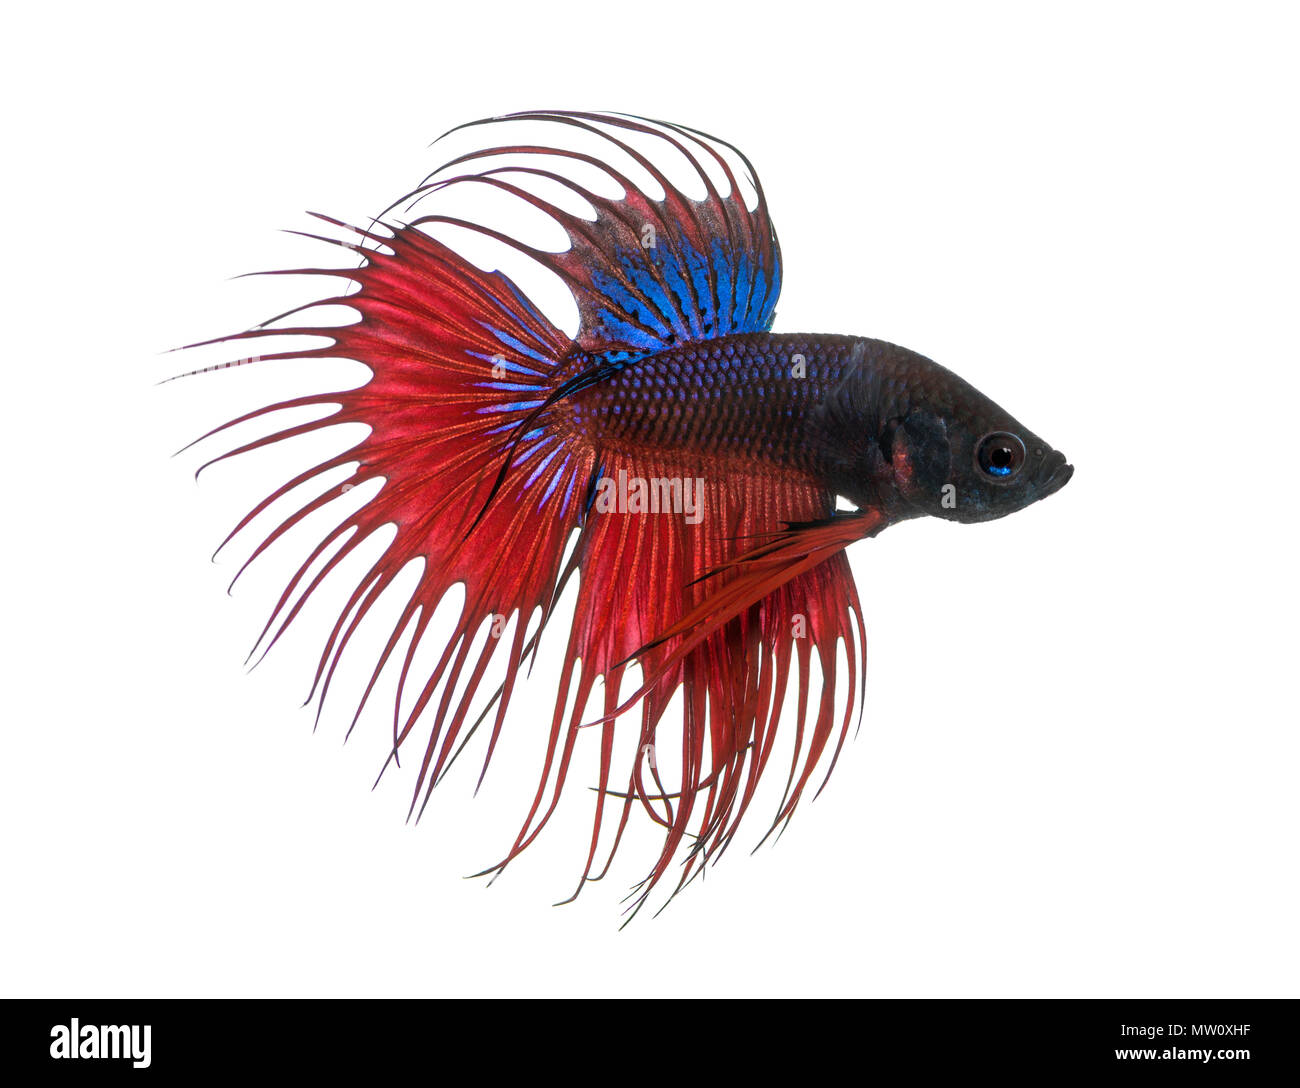 Side view of a Siamese fighting fish, Betta splendens, isolated on white Stock Photo